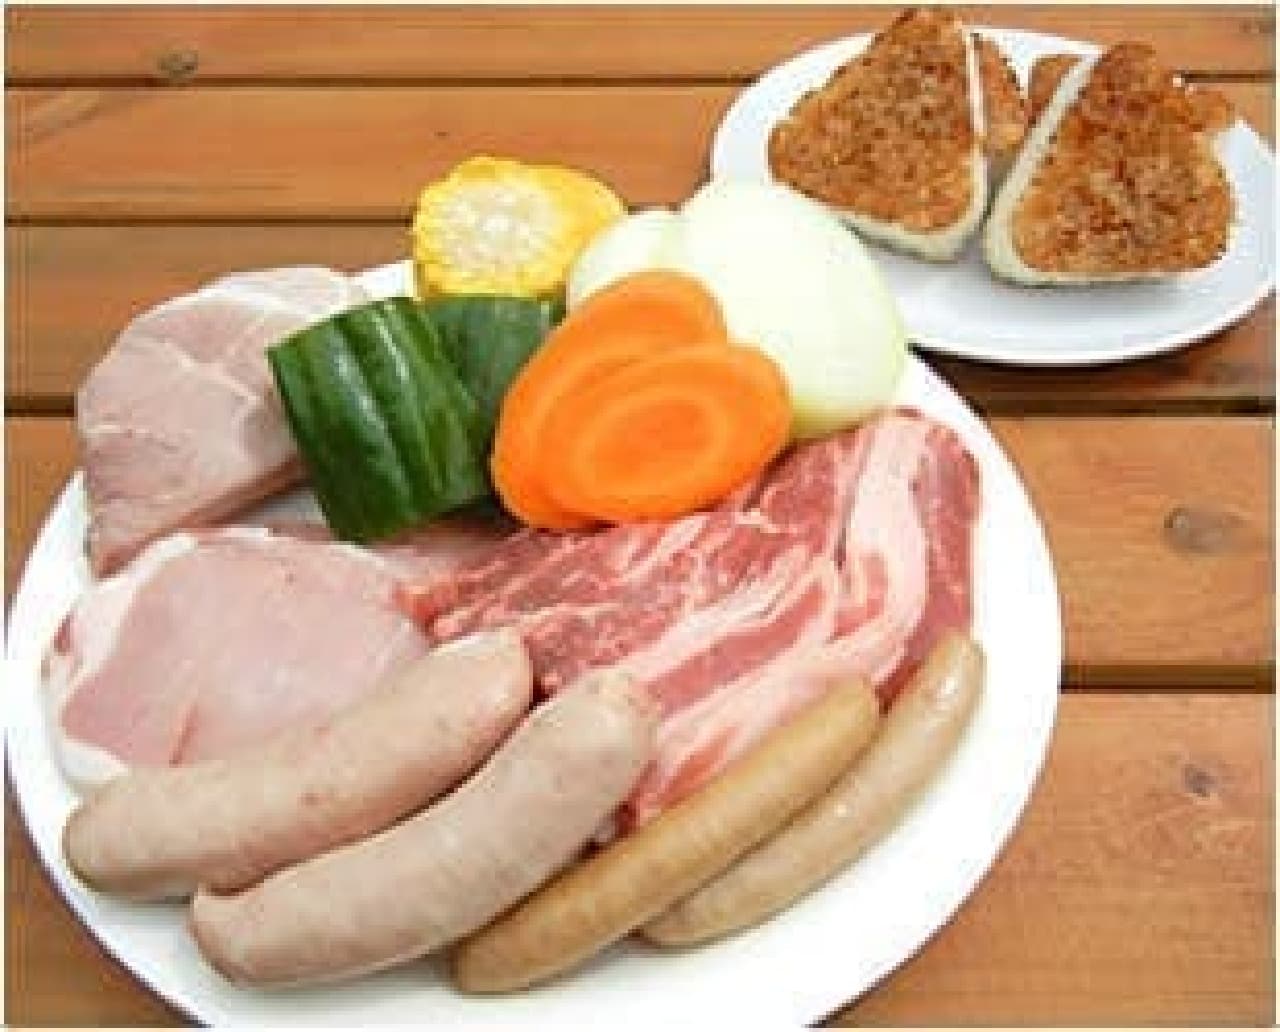 Regular set (photo shows image for two servings) (Source: Digicue)